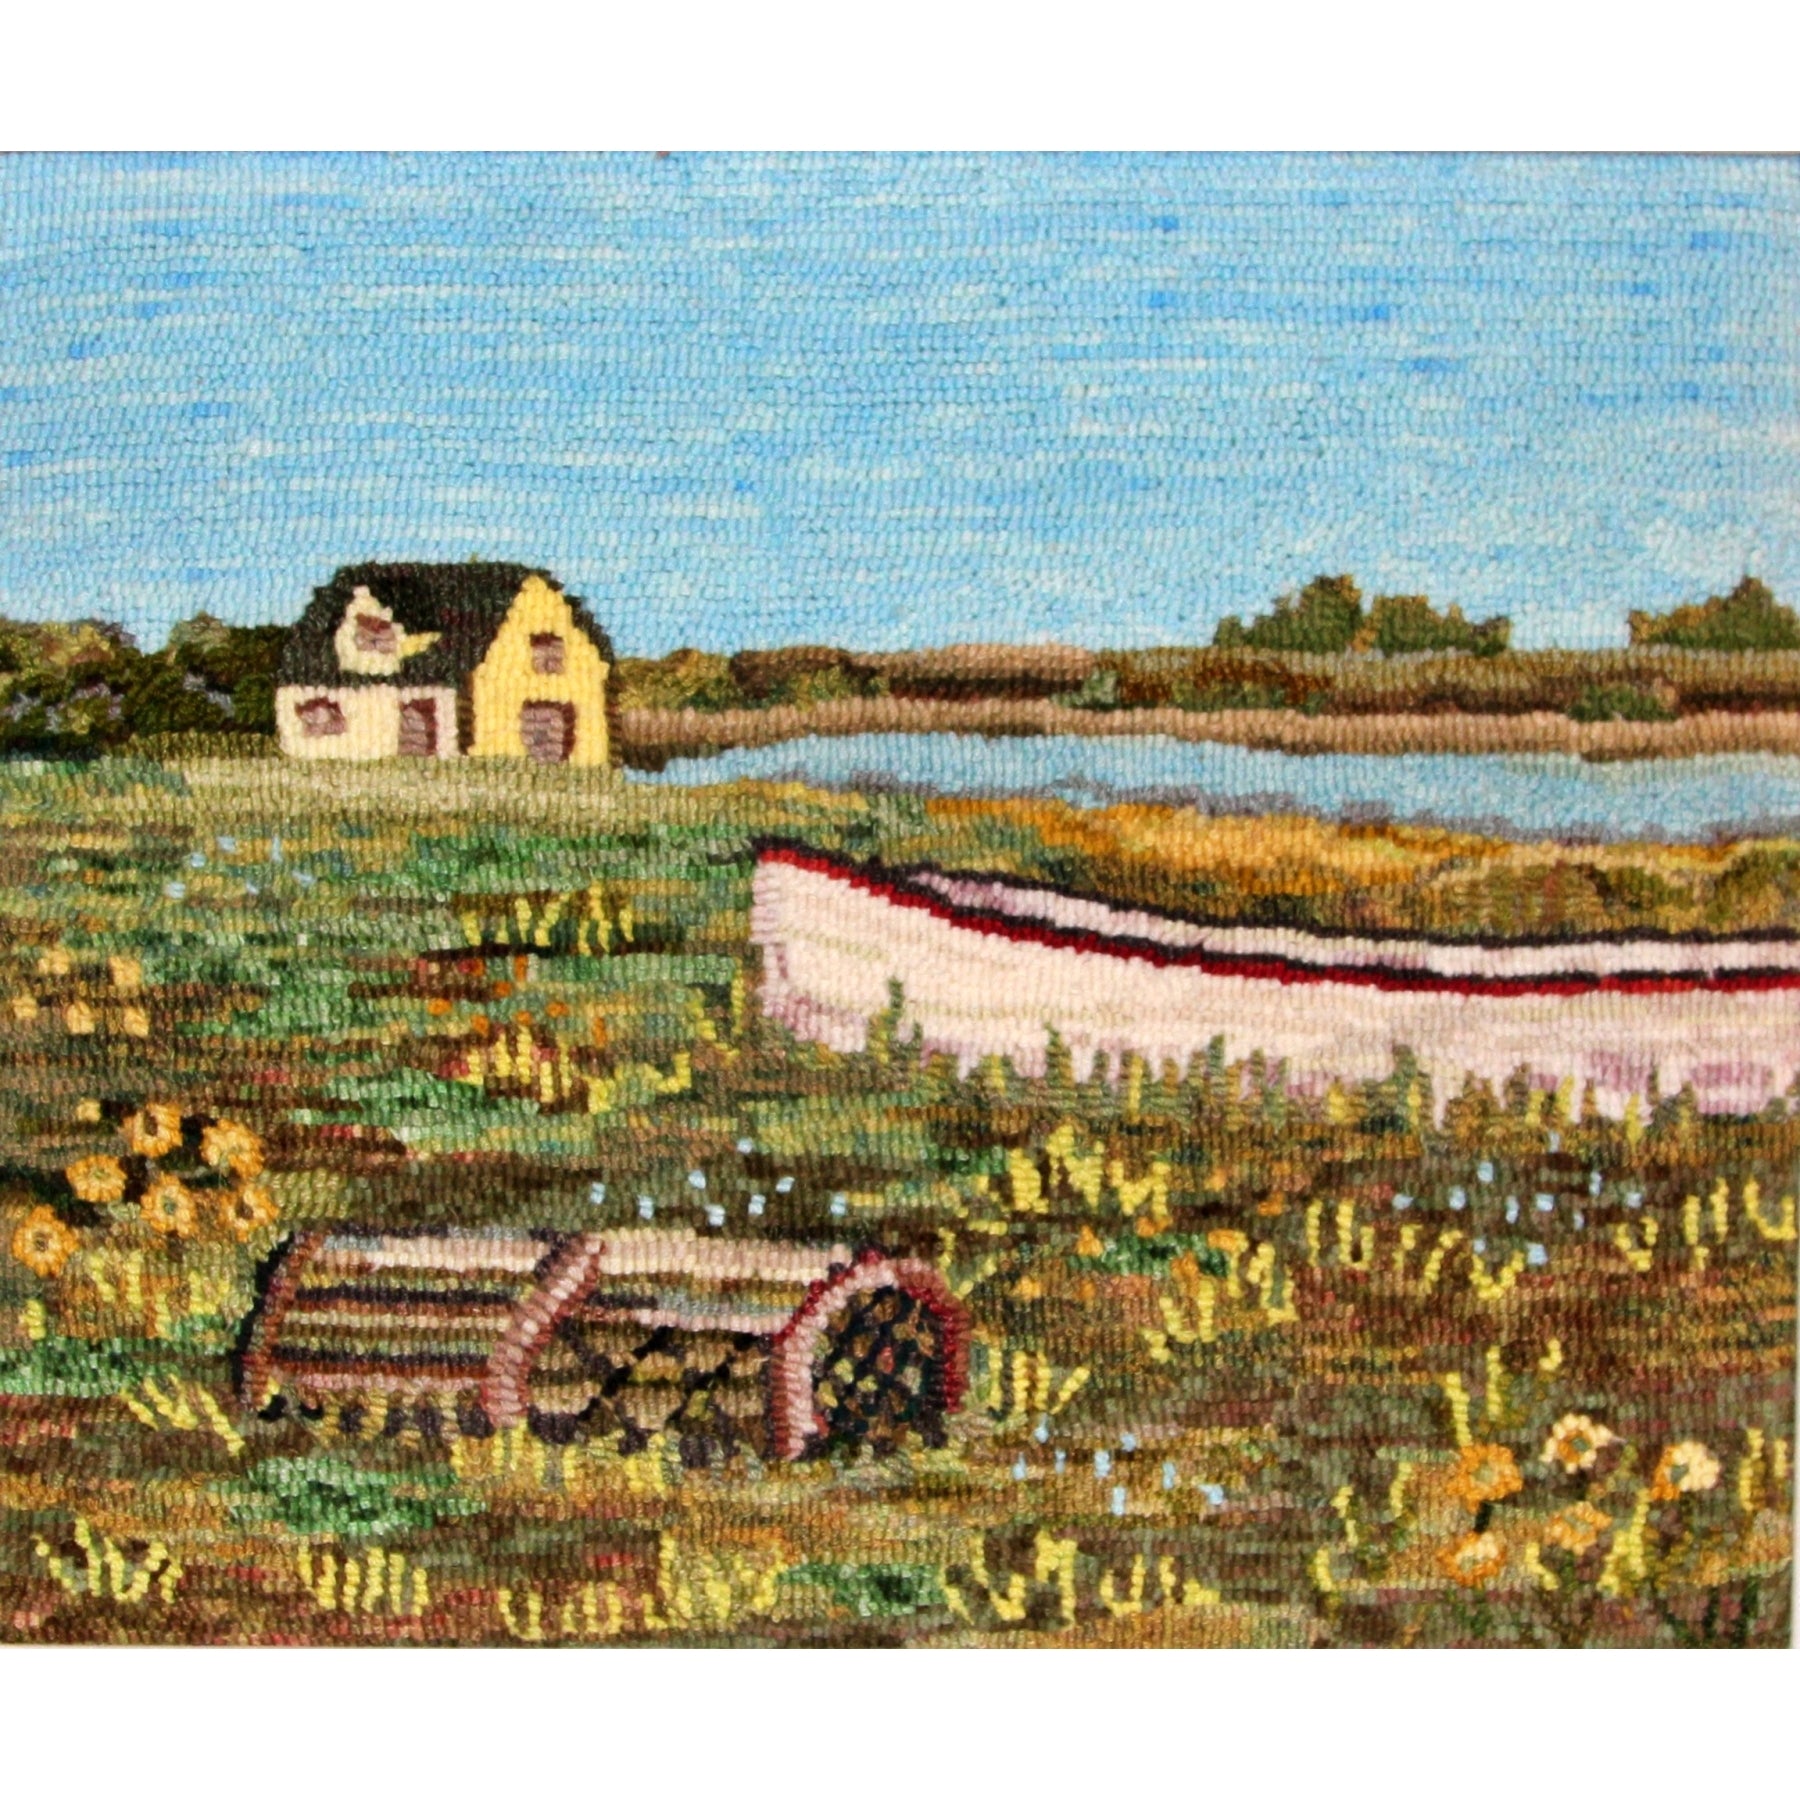 Victoria-by-the-sea P.E.I., rug hooked by Jane McGown Flynn